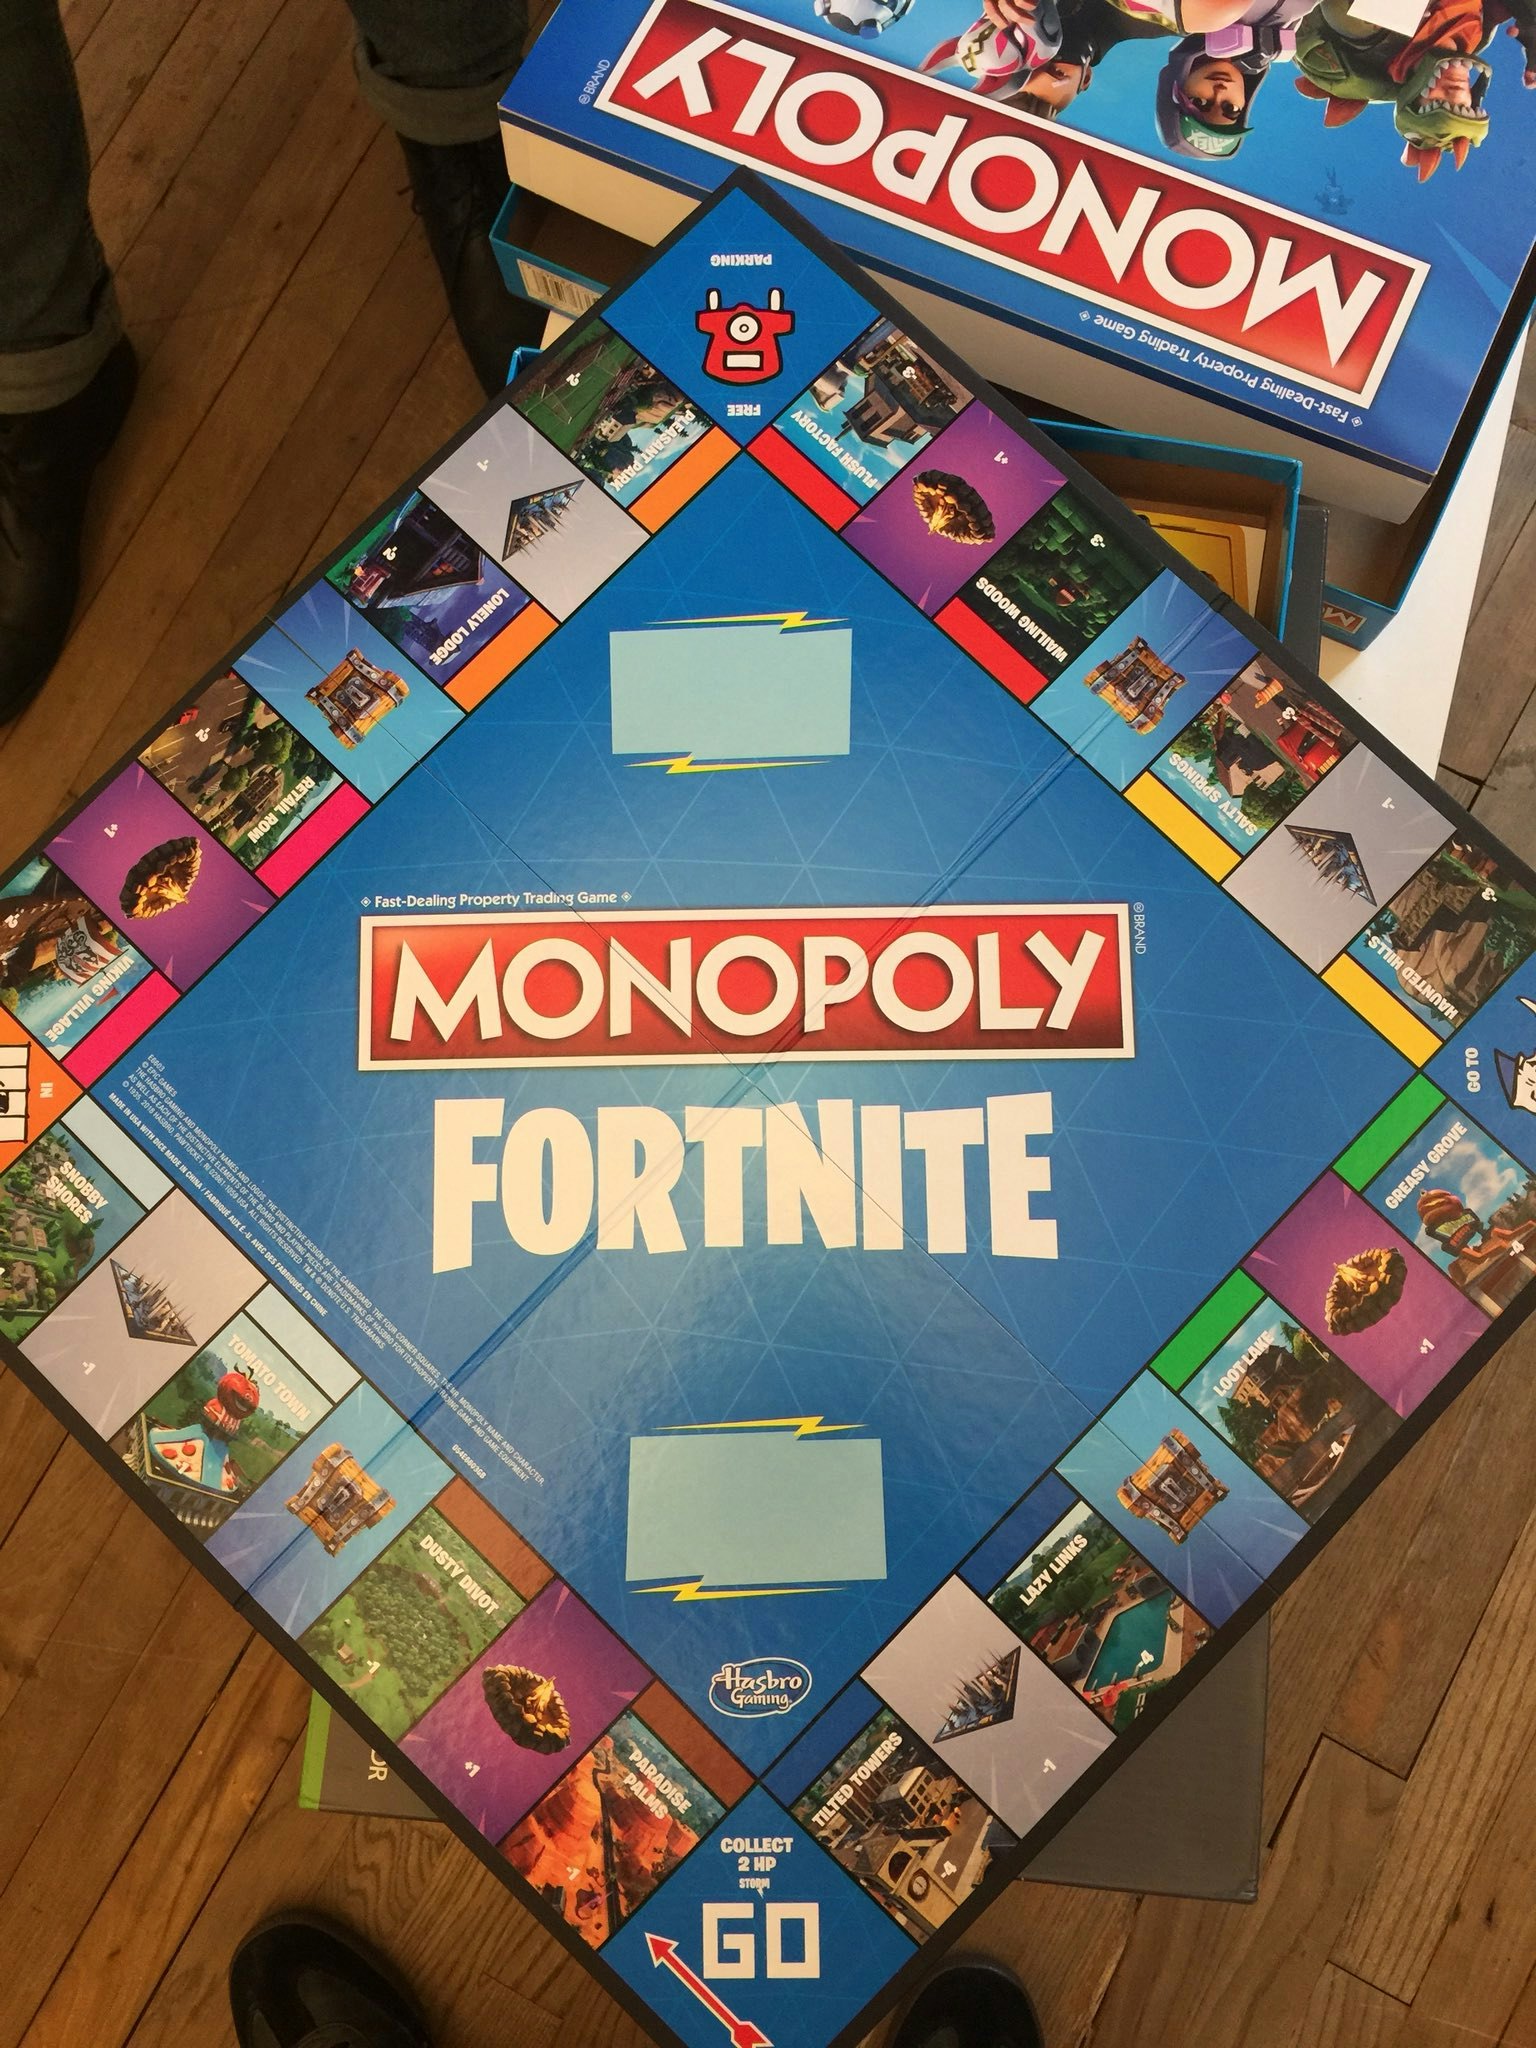 where can i buy fortnite monopoly